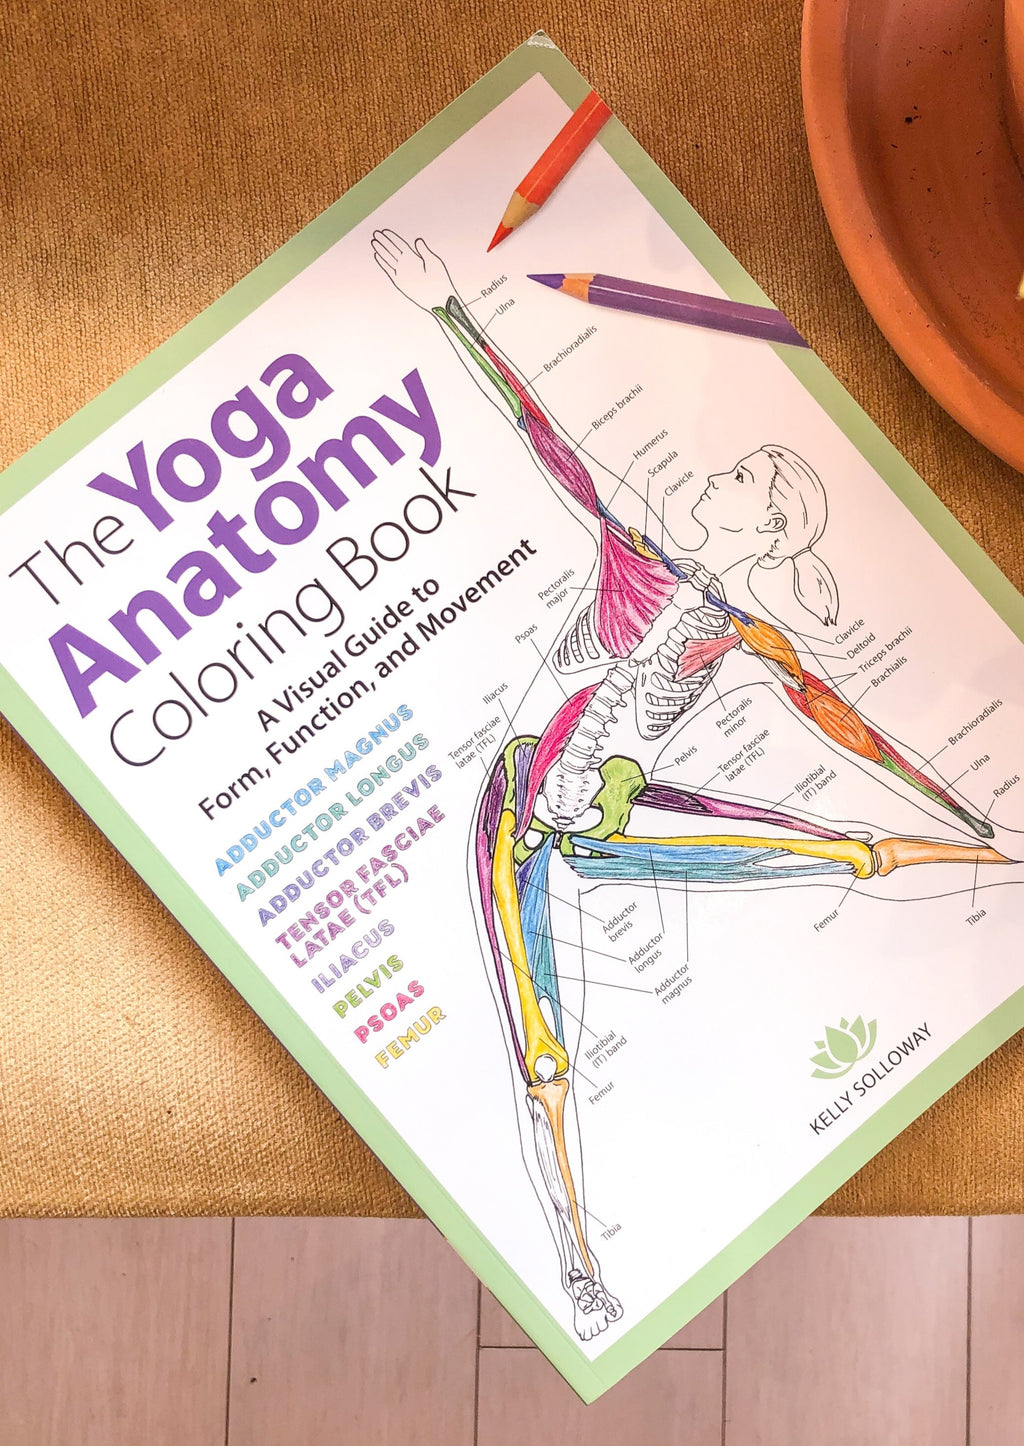 The Yoga Anatomy Coloring Book – The Monarch Collective